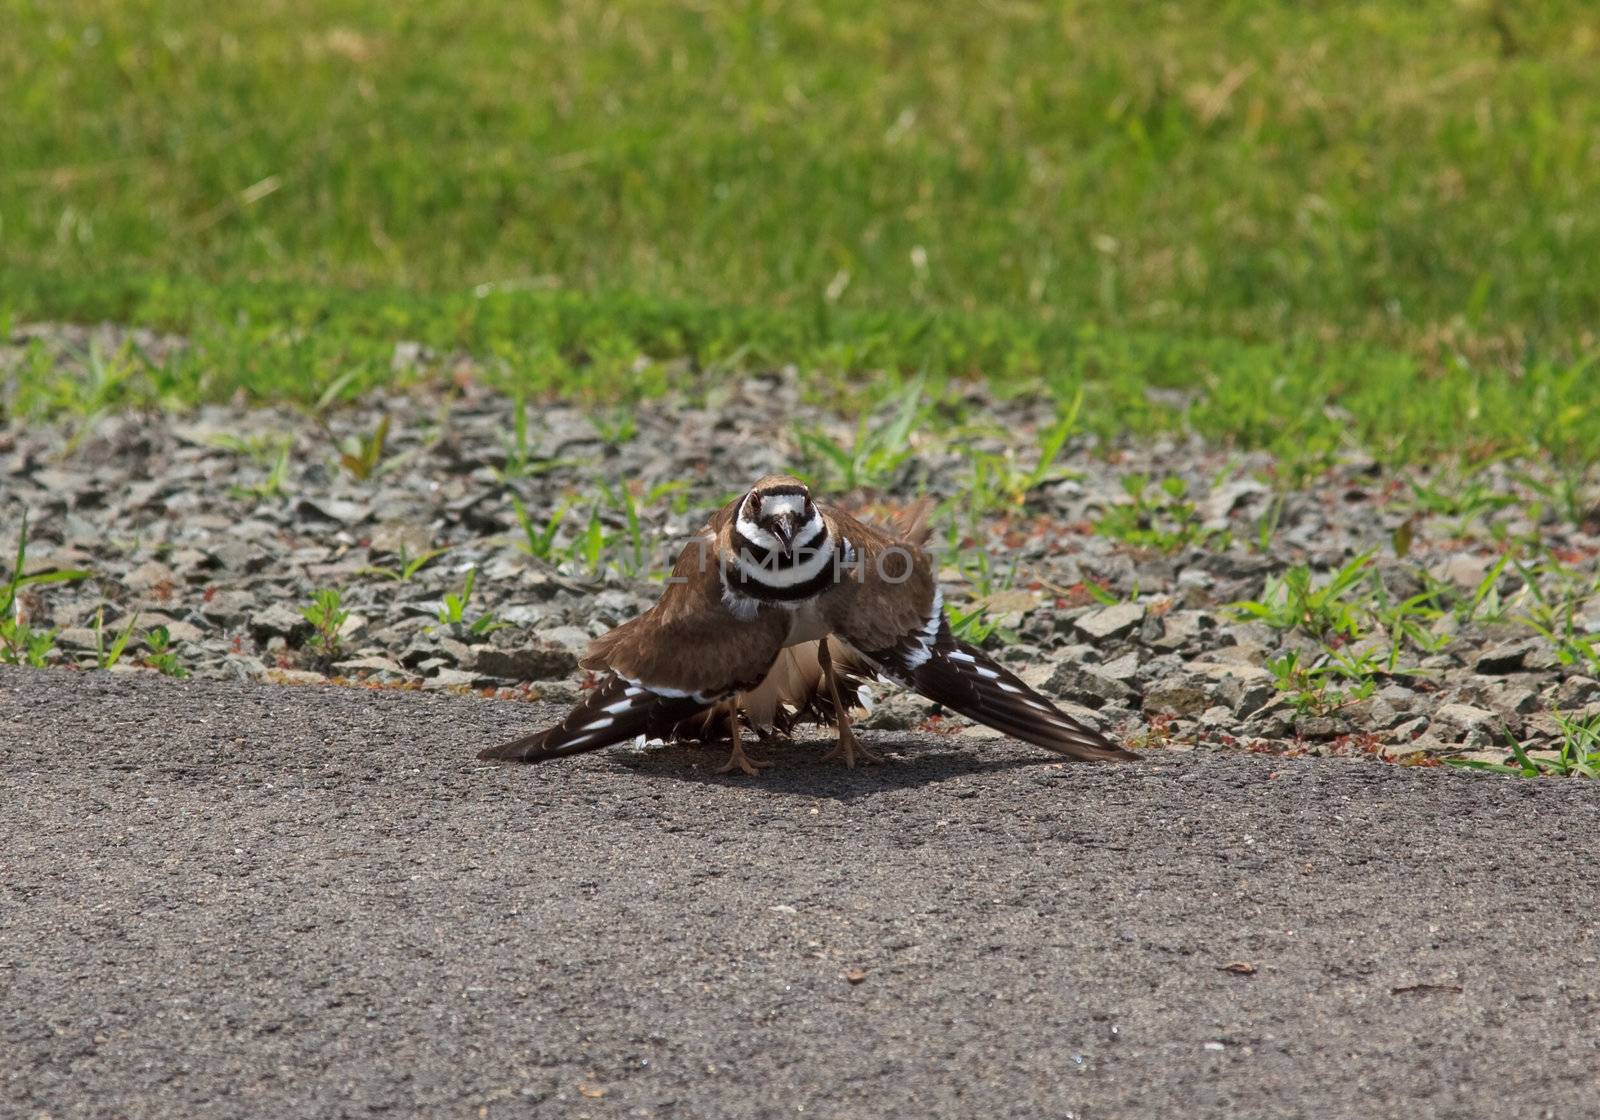 Killdeer bird with angry stance as it defends its nest in loose gravel by roadside